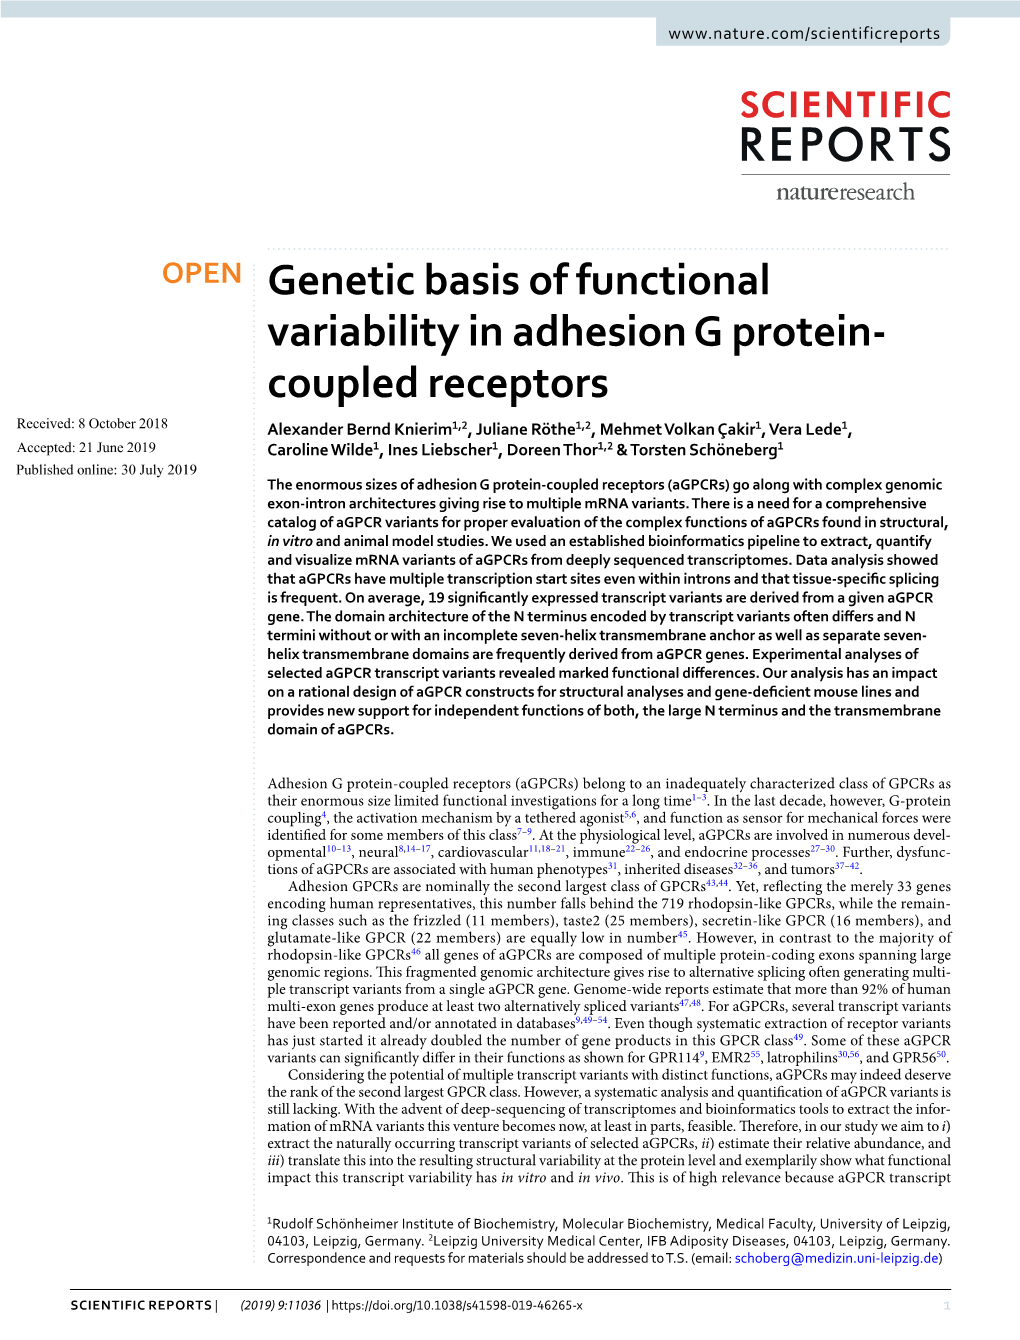 Genetic Basis of Functional Variability in Adhesion G Protein-Coupled